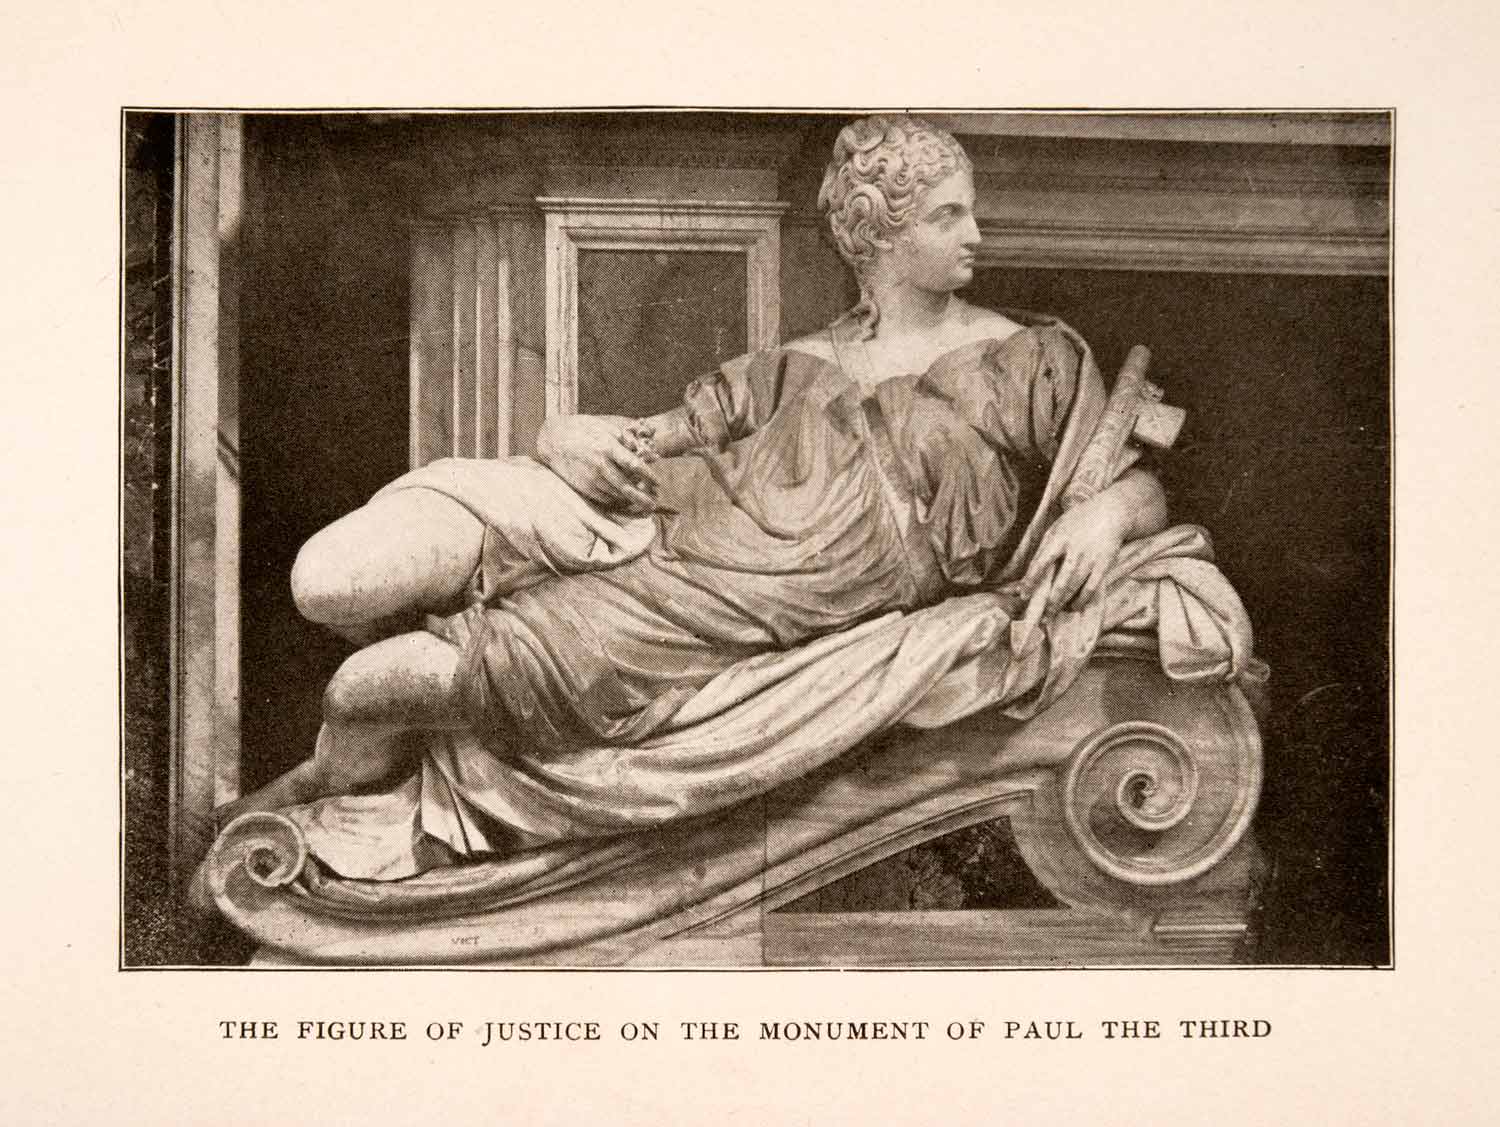 1905 Halftone Print Sculpture Justice Pope Paul Third Rome Italy Monument XGKA6